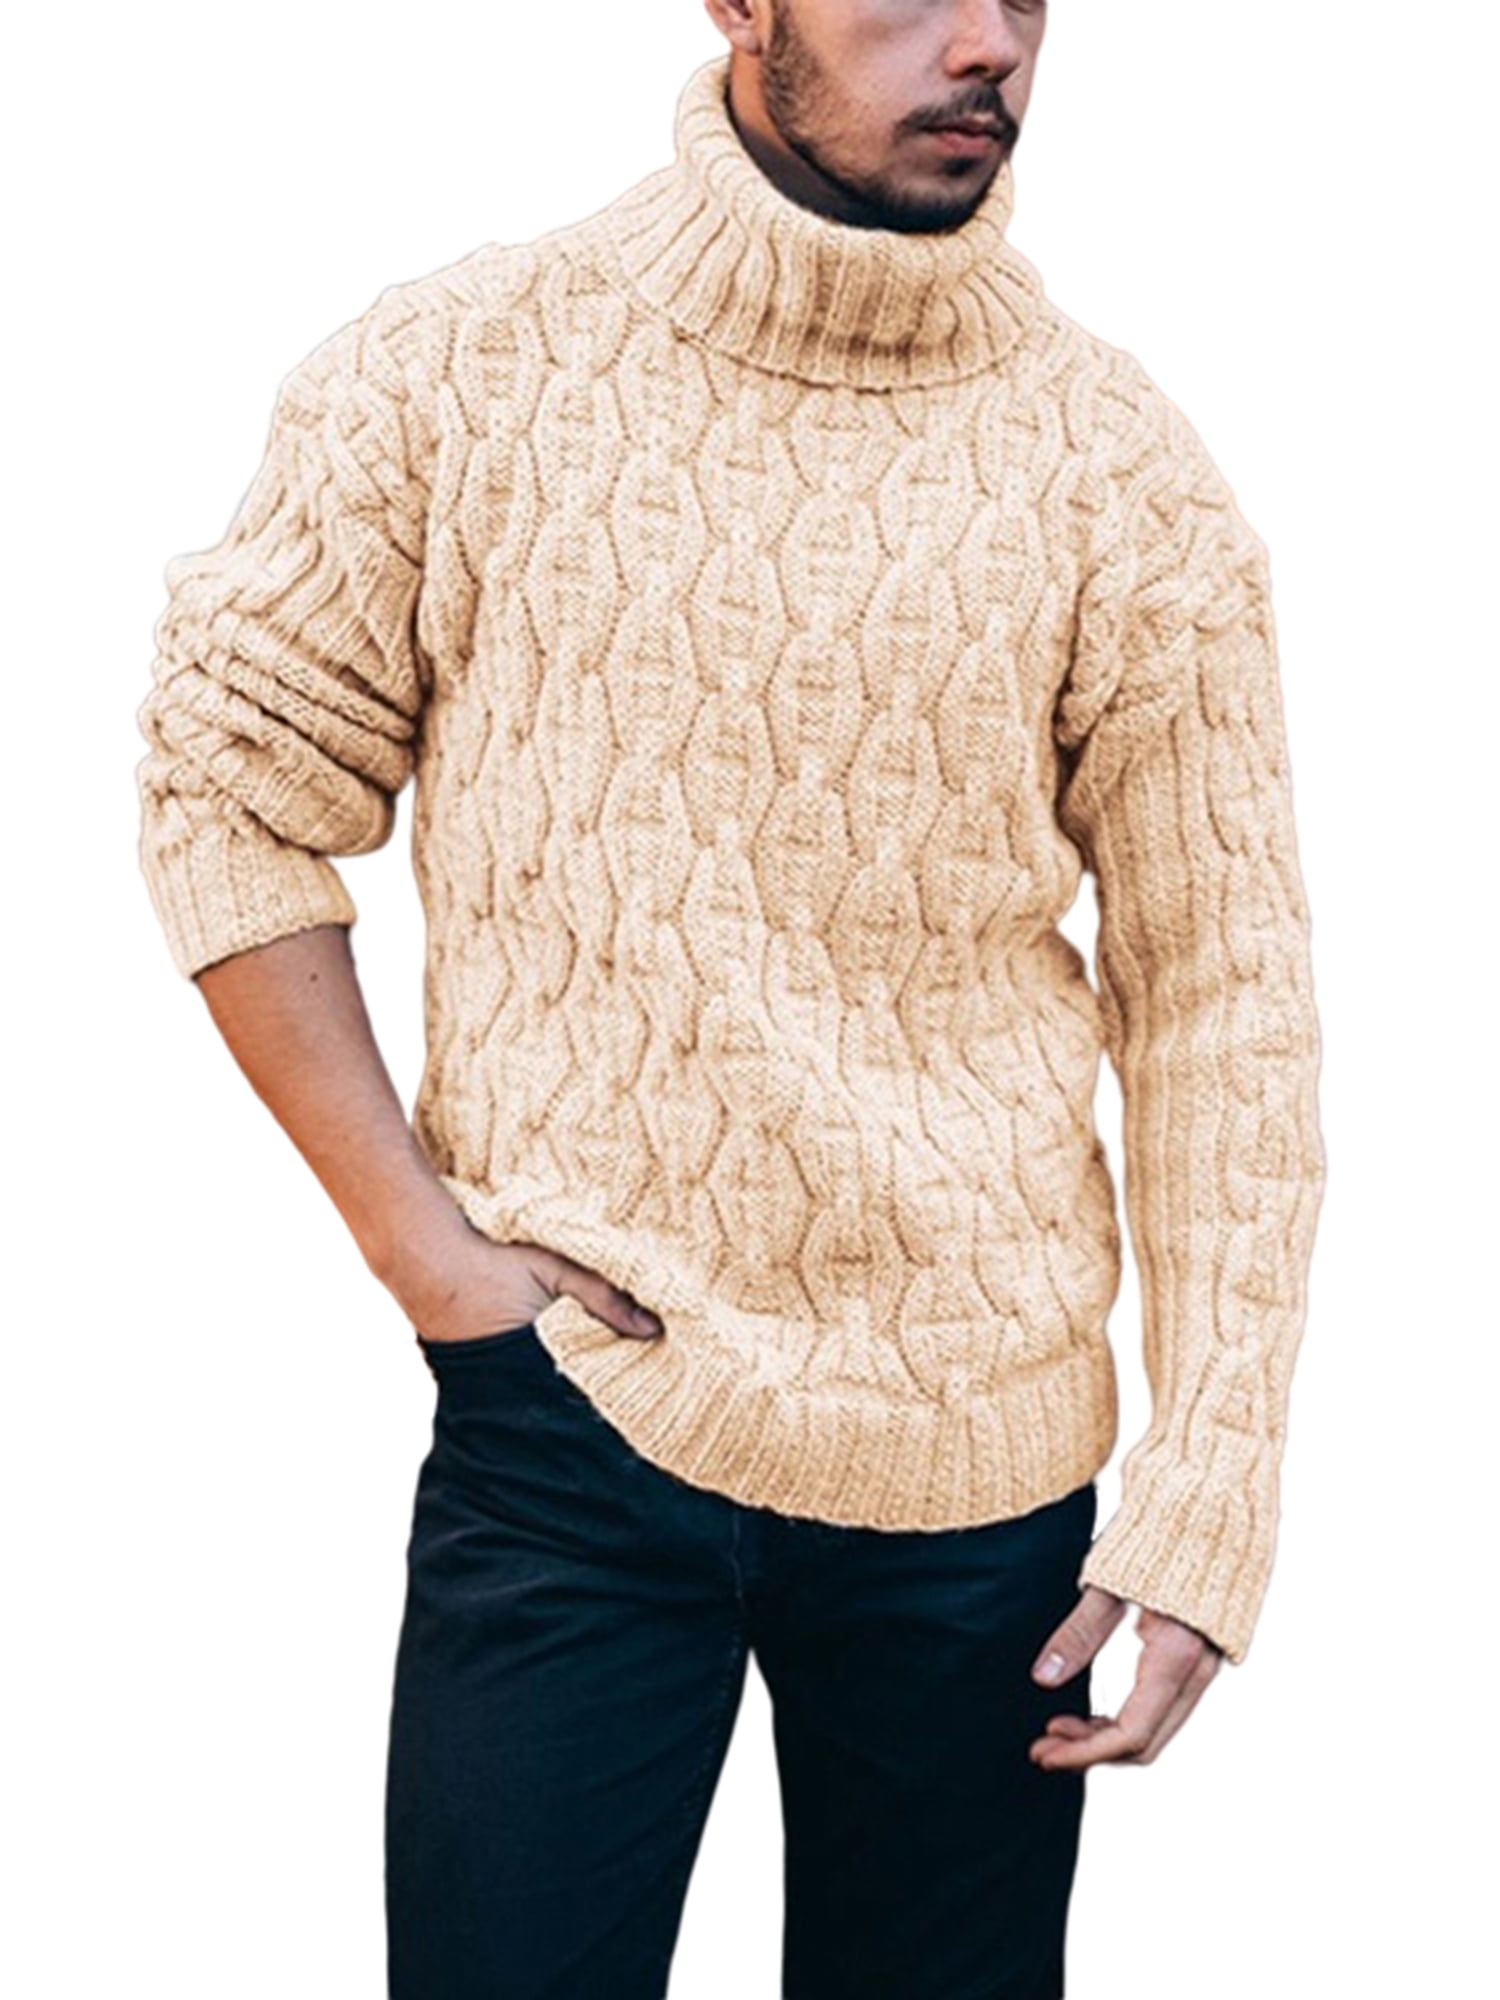 Freely Mens Slim Casual Mock Neck Long Sleeve Knitting Sweater Pullover